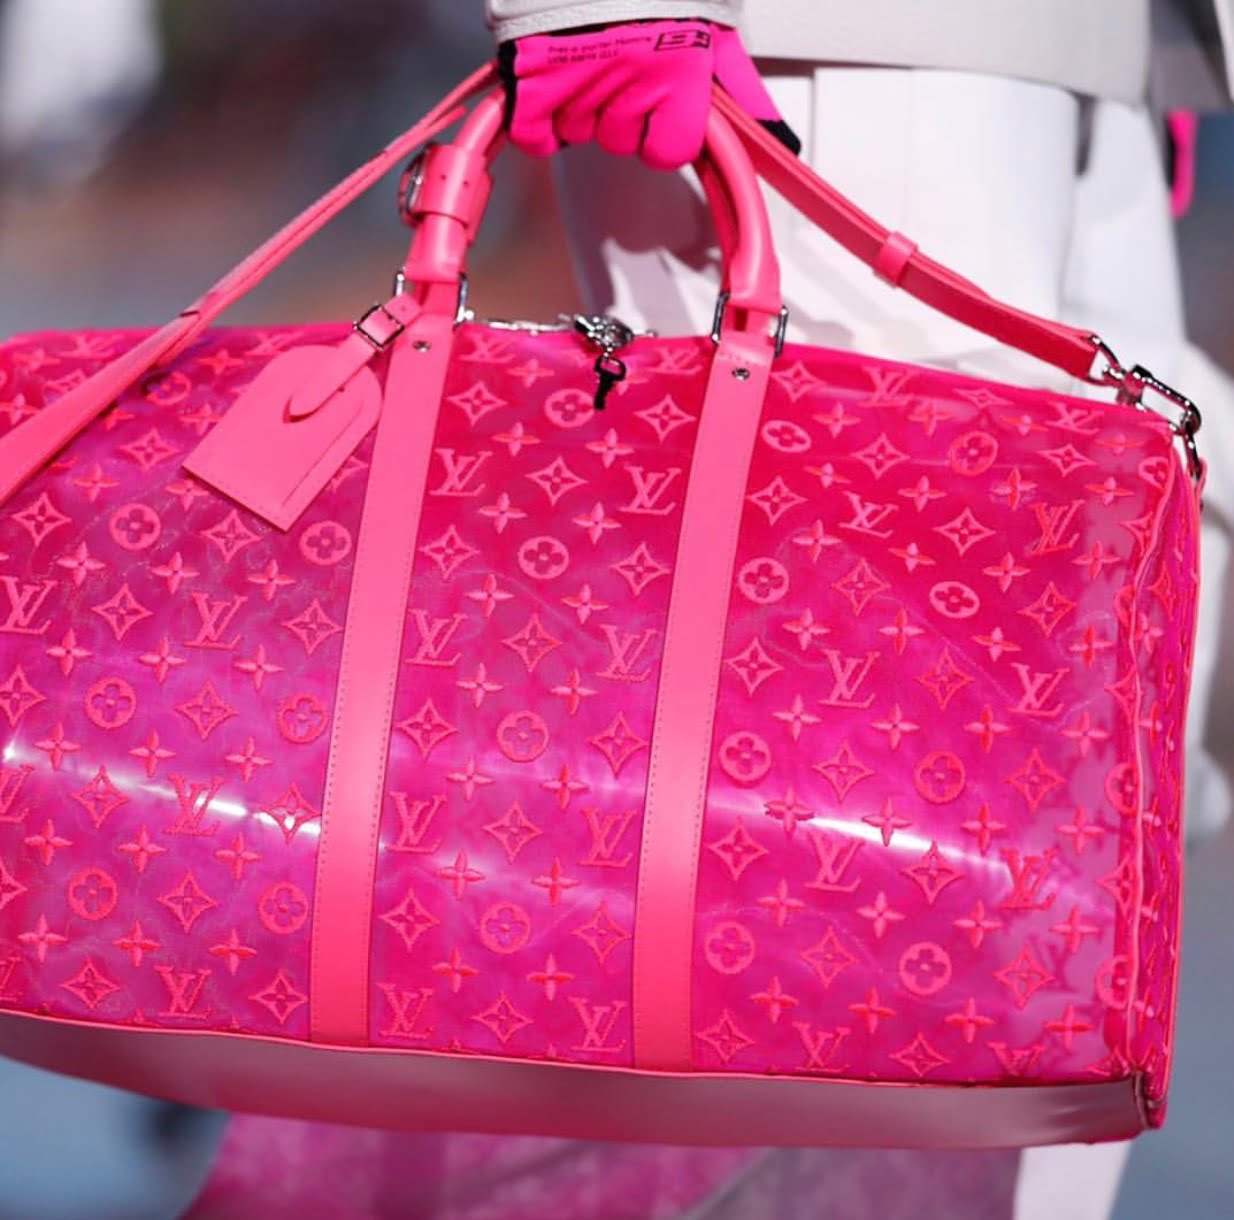 LV fever: 6 Most Expensive Louis Vuitton Bags In The World